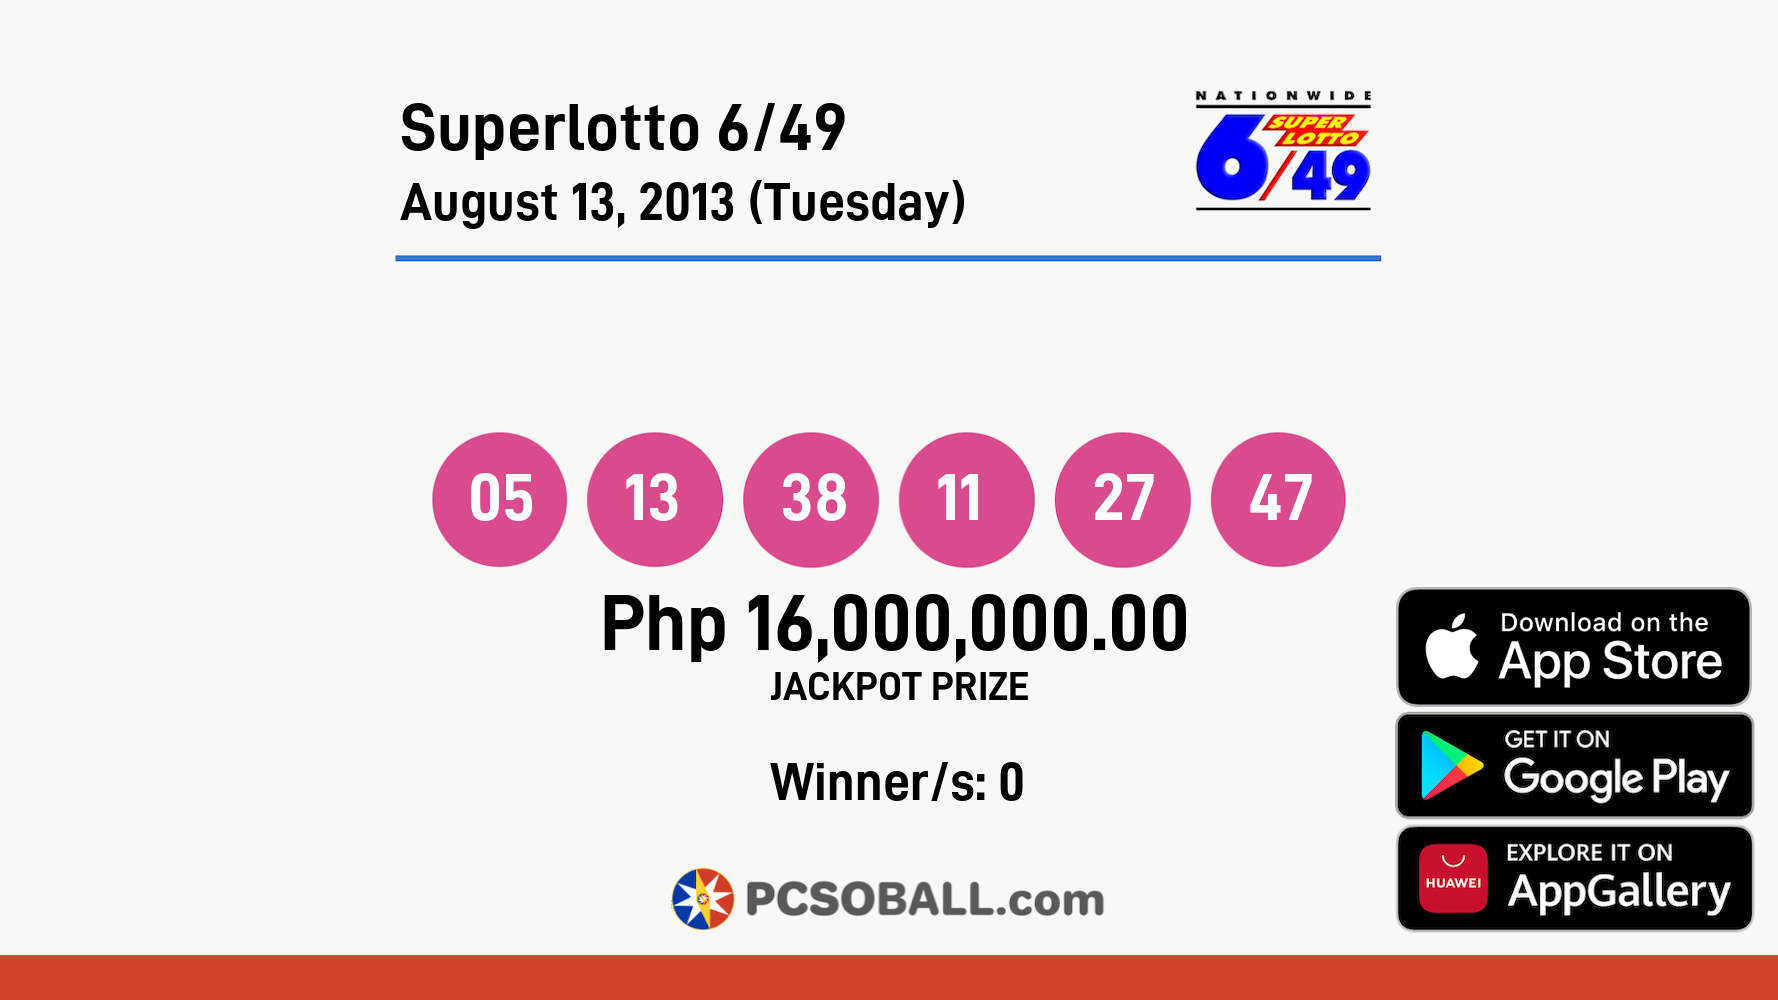 Superlotto 6/49 August 13, 2013 (Tuesday) Result